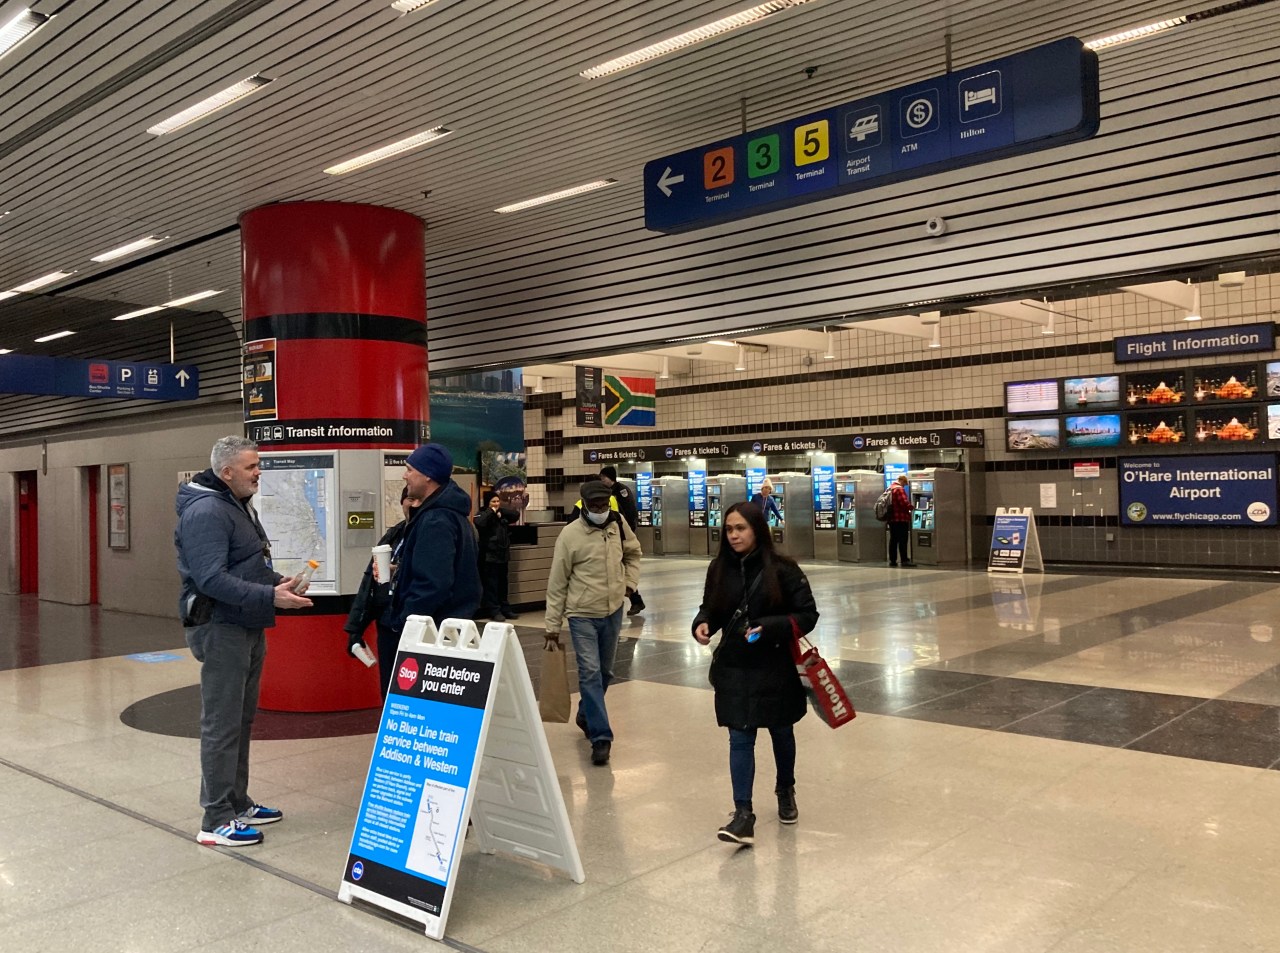 When I flew into O'Hare on February 25 around 11 p.m., there were several security guards and police officers at the station. Photo: John Greenfield